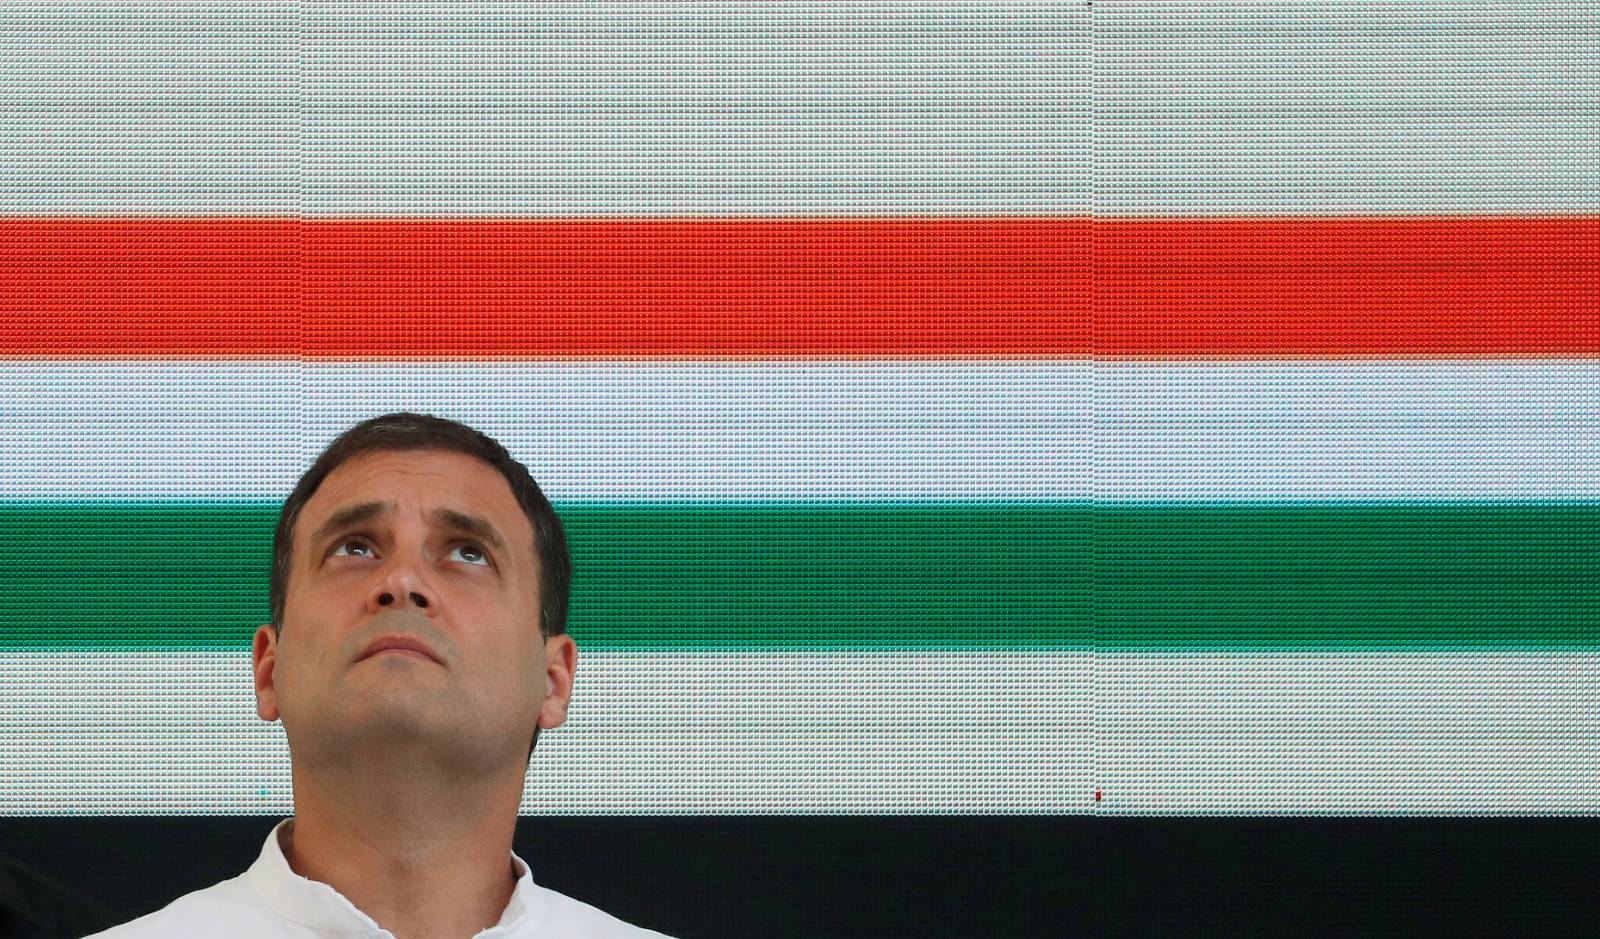 FILE PHOTO: Rahul Gandhi, President of India's main opposition Congress party, looks up before releasing his party's election manifesto for the April/May general election in New Delhi